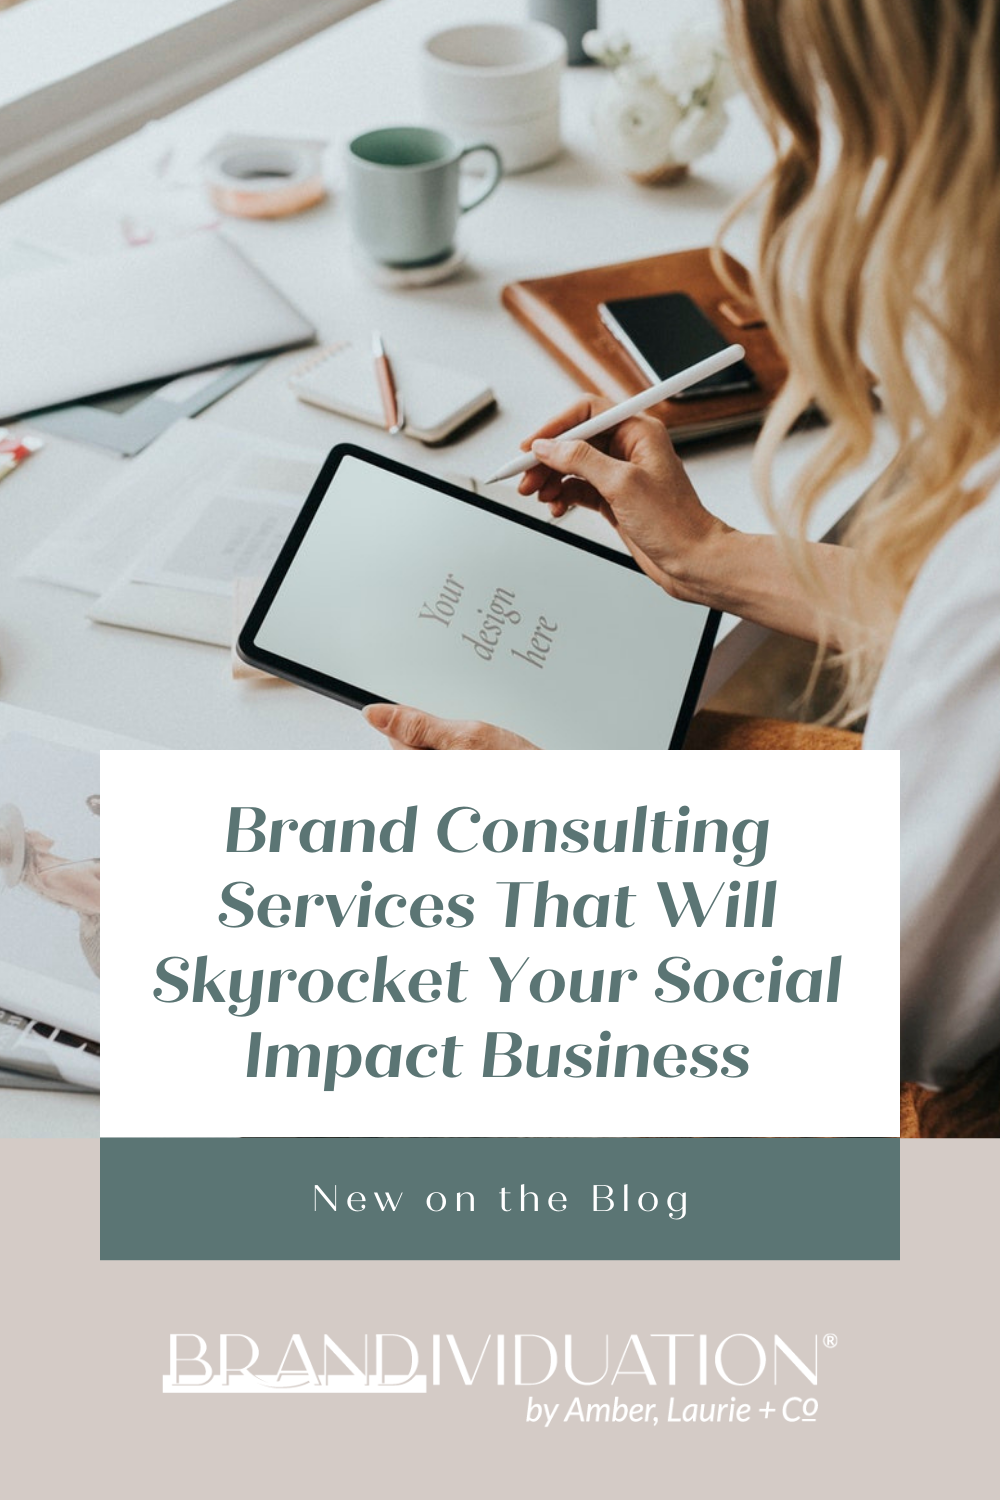 Brand Consulting Services That Will Skyrocket Your Social Impact Business